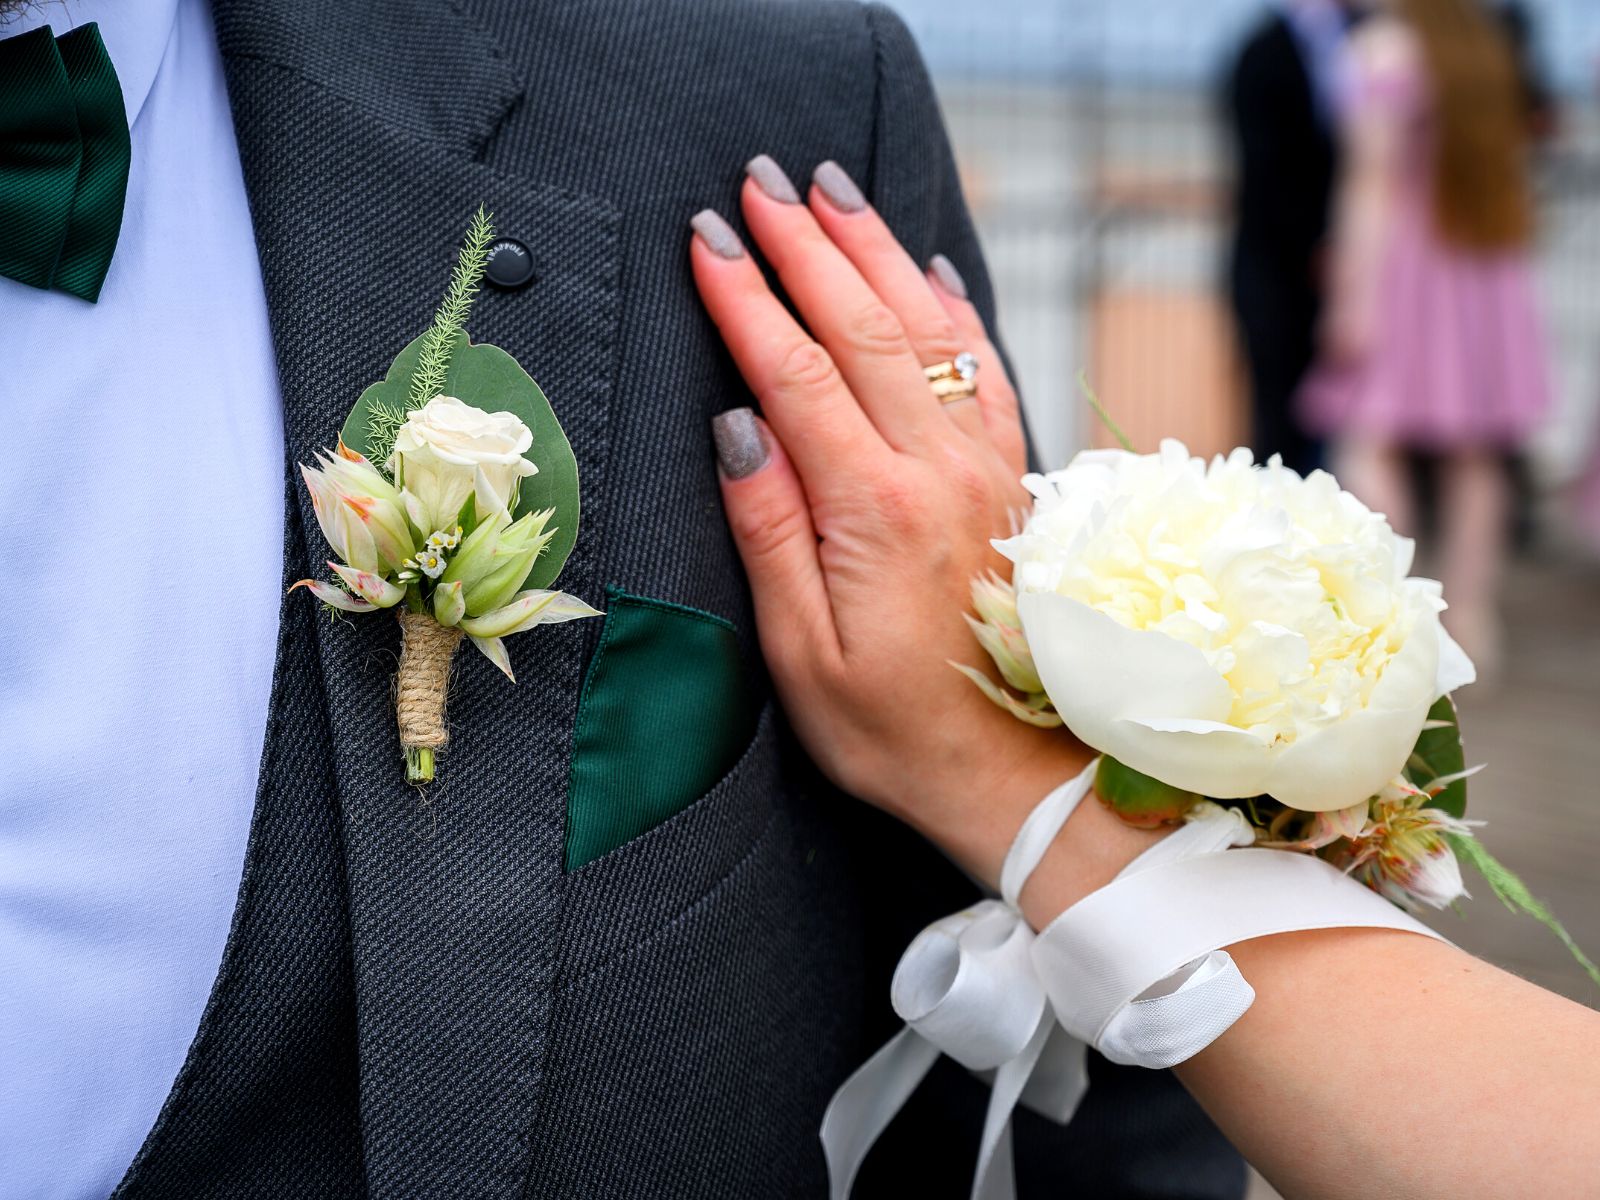 Flower Bracelets With Protea Blushing Bride and Peonies and the Corsage on Thursd